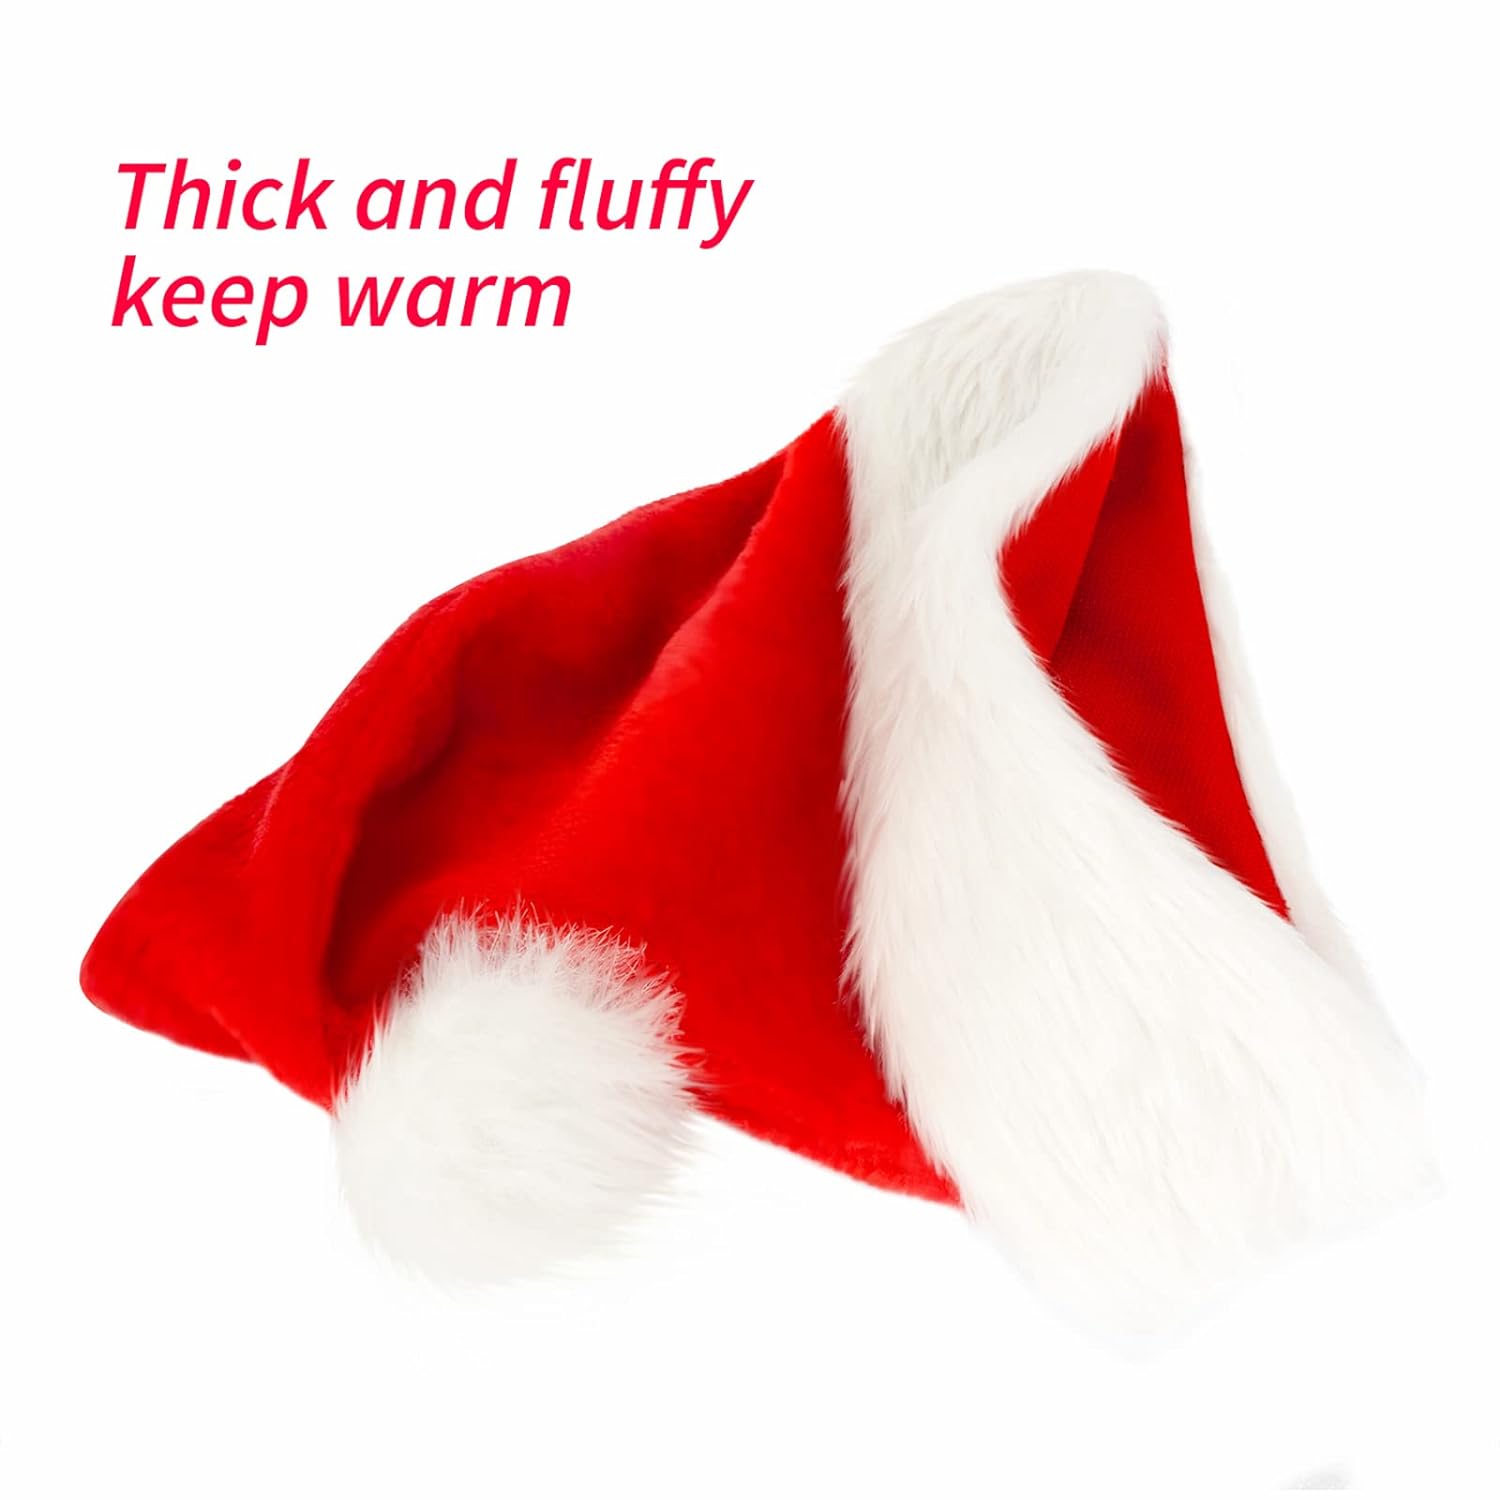 eCraftIndia Red and White Velvet Classic Fur Merry Christmas Hats, Santa Claus Caps for kids and Adults - XMAS Caps, Santa Hats for Christmas, New Year, Festive Holiday Party Celebration (Set of 12) 5